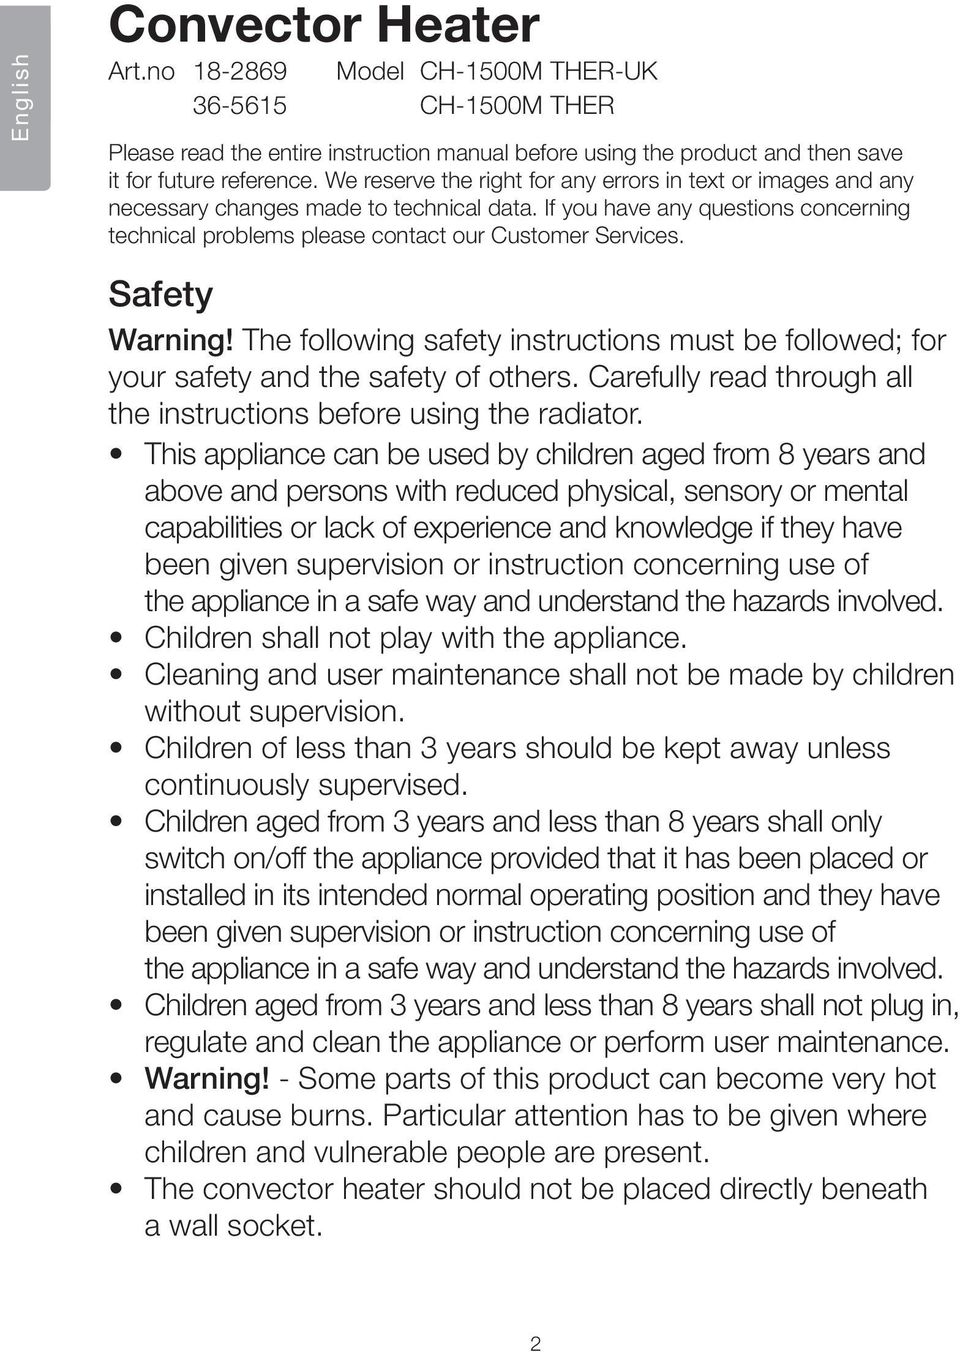 Safety Warning! The following safety instructions must be followed; for your safety and the safety of others. Carefully read through all the instructions before using the radiator.